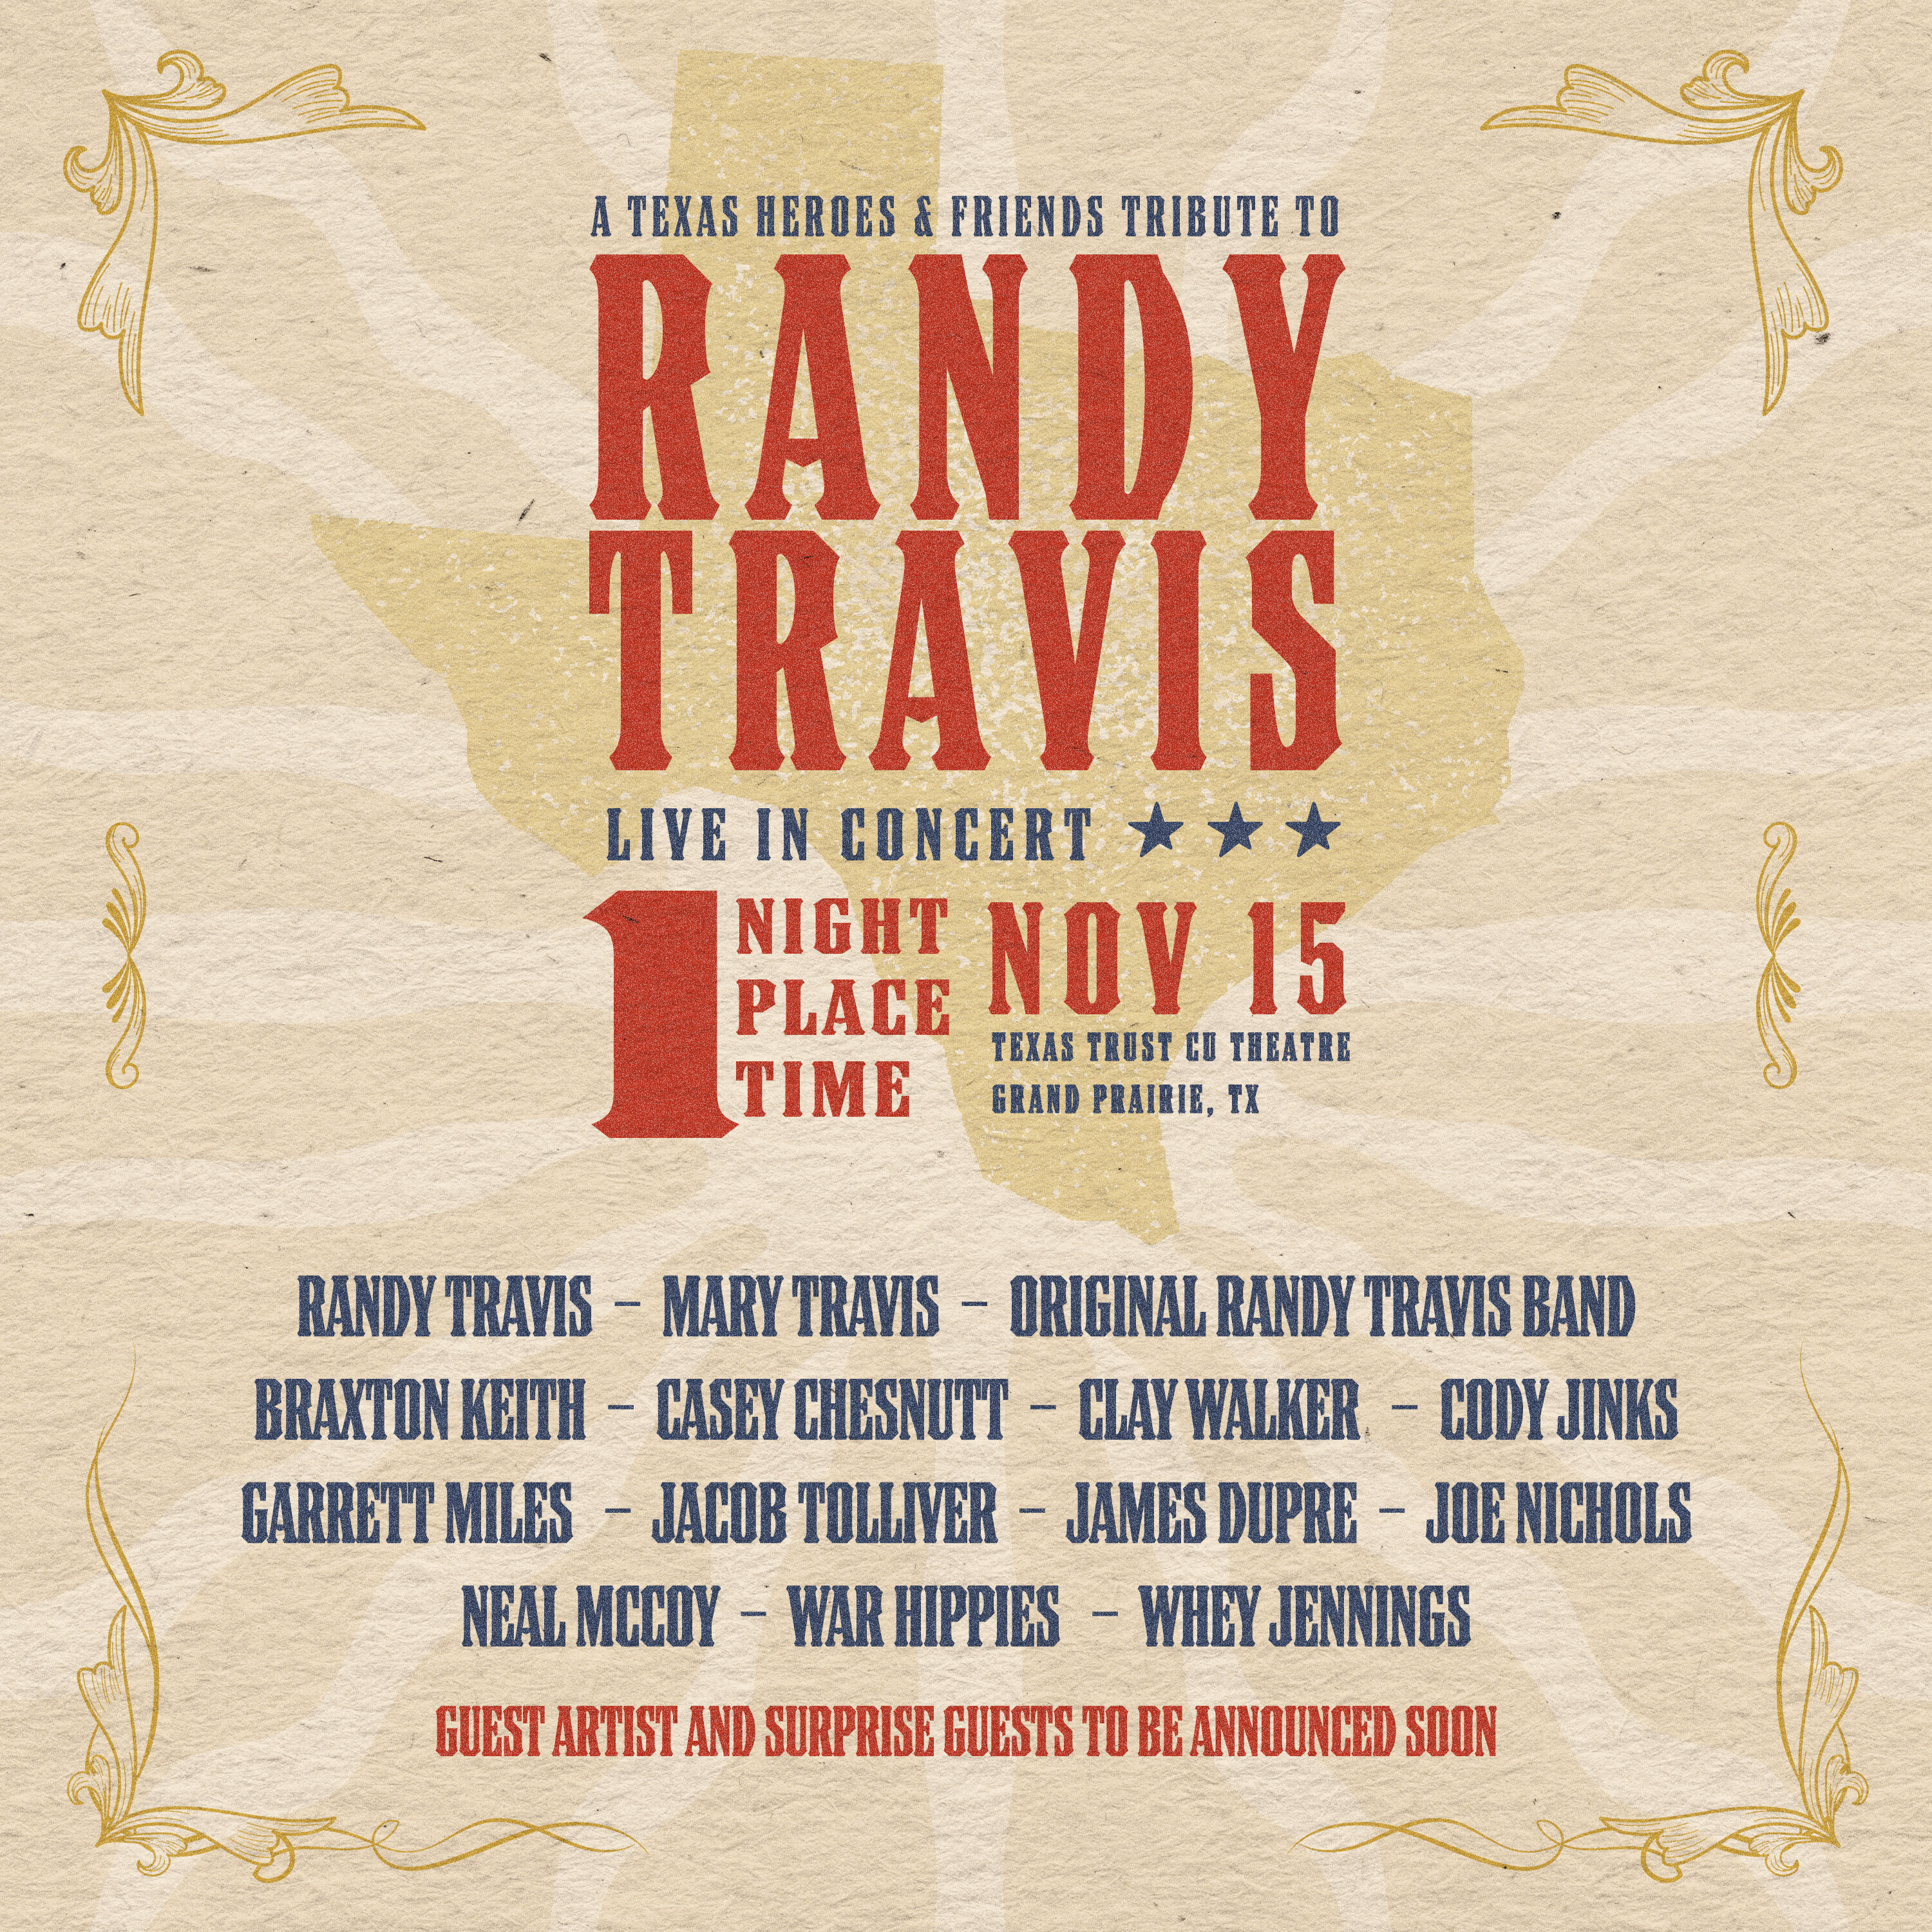 LINEUP ANNOUNCED: ‘A Texas Heroes & Friends Tribute to Randy Travis’